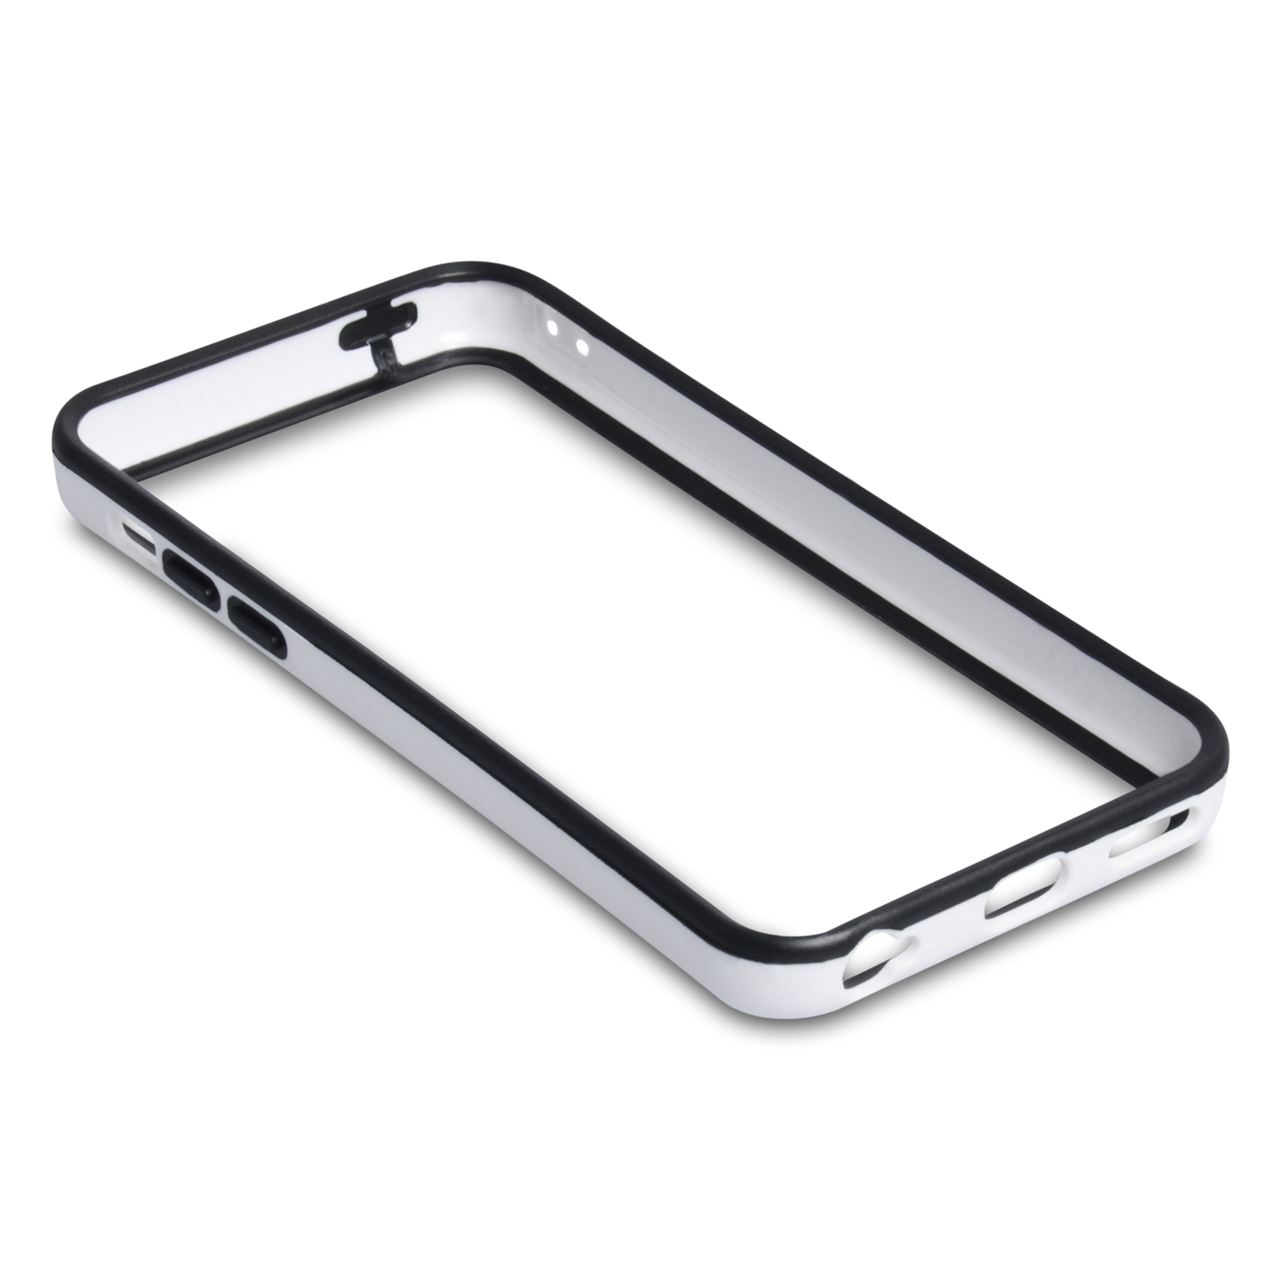 YouSave Accessories iPhone 5C Bumper Case - White and Black